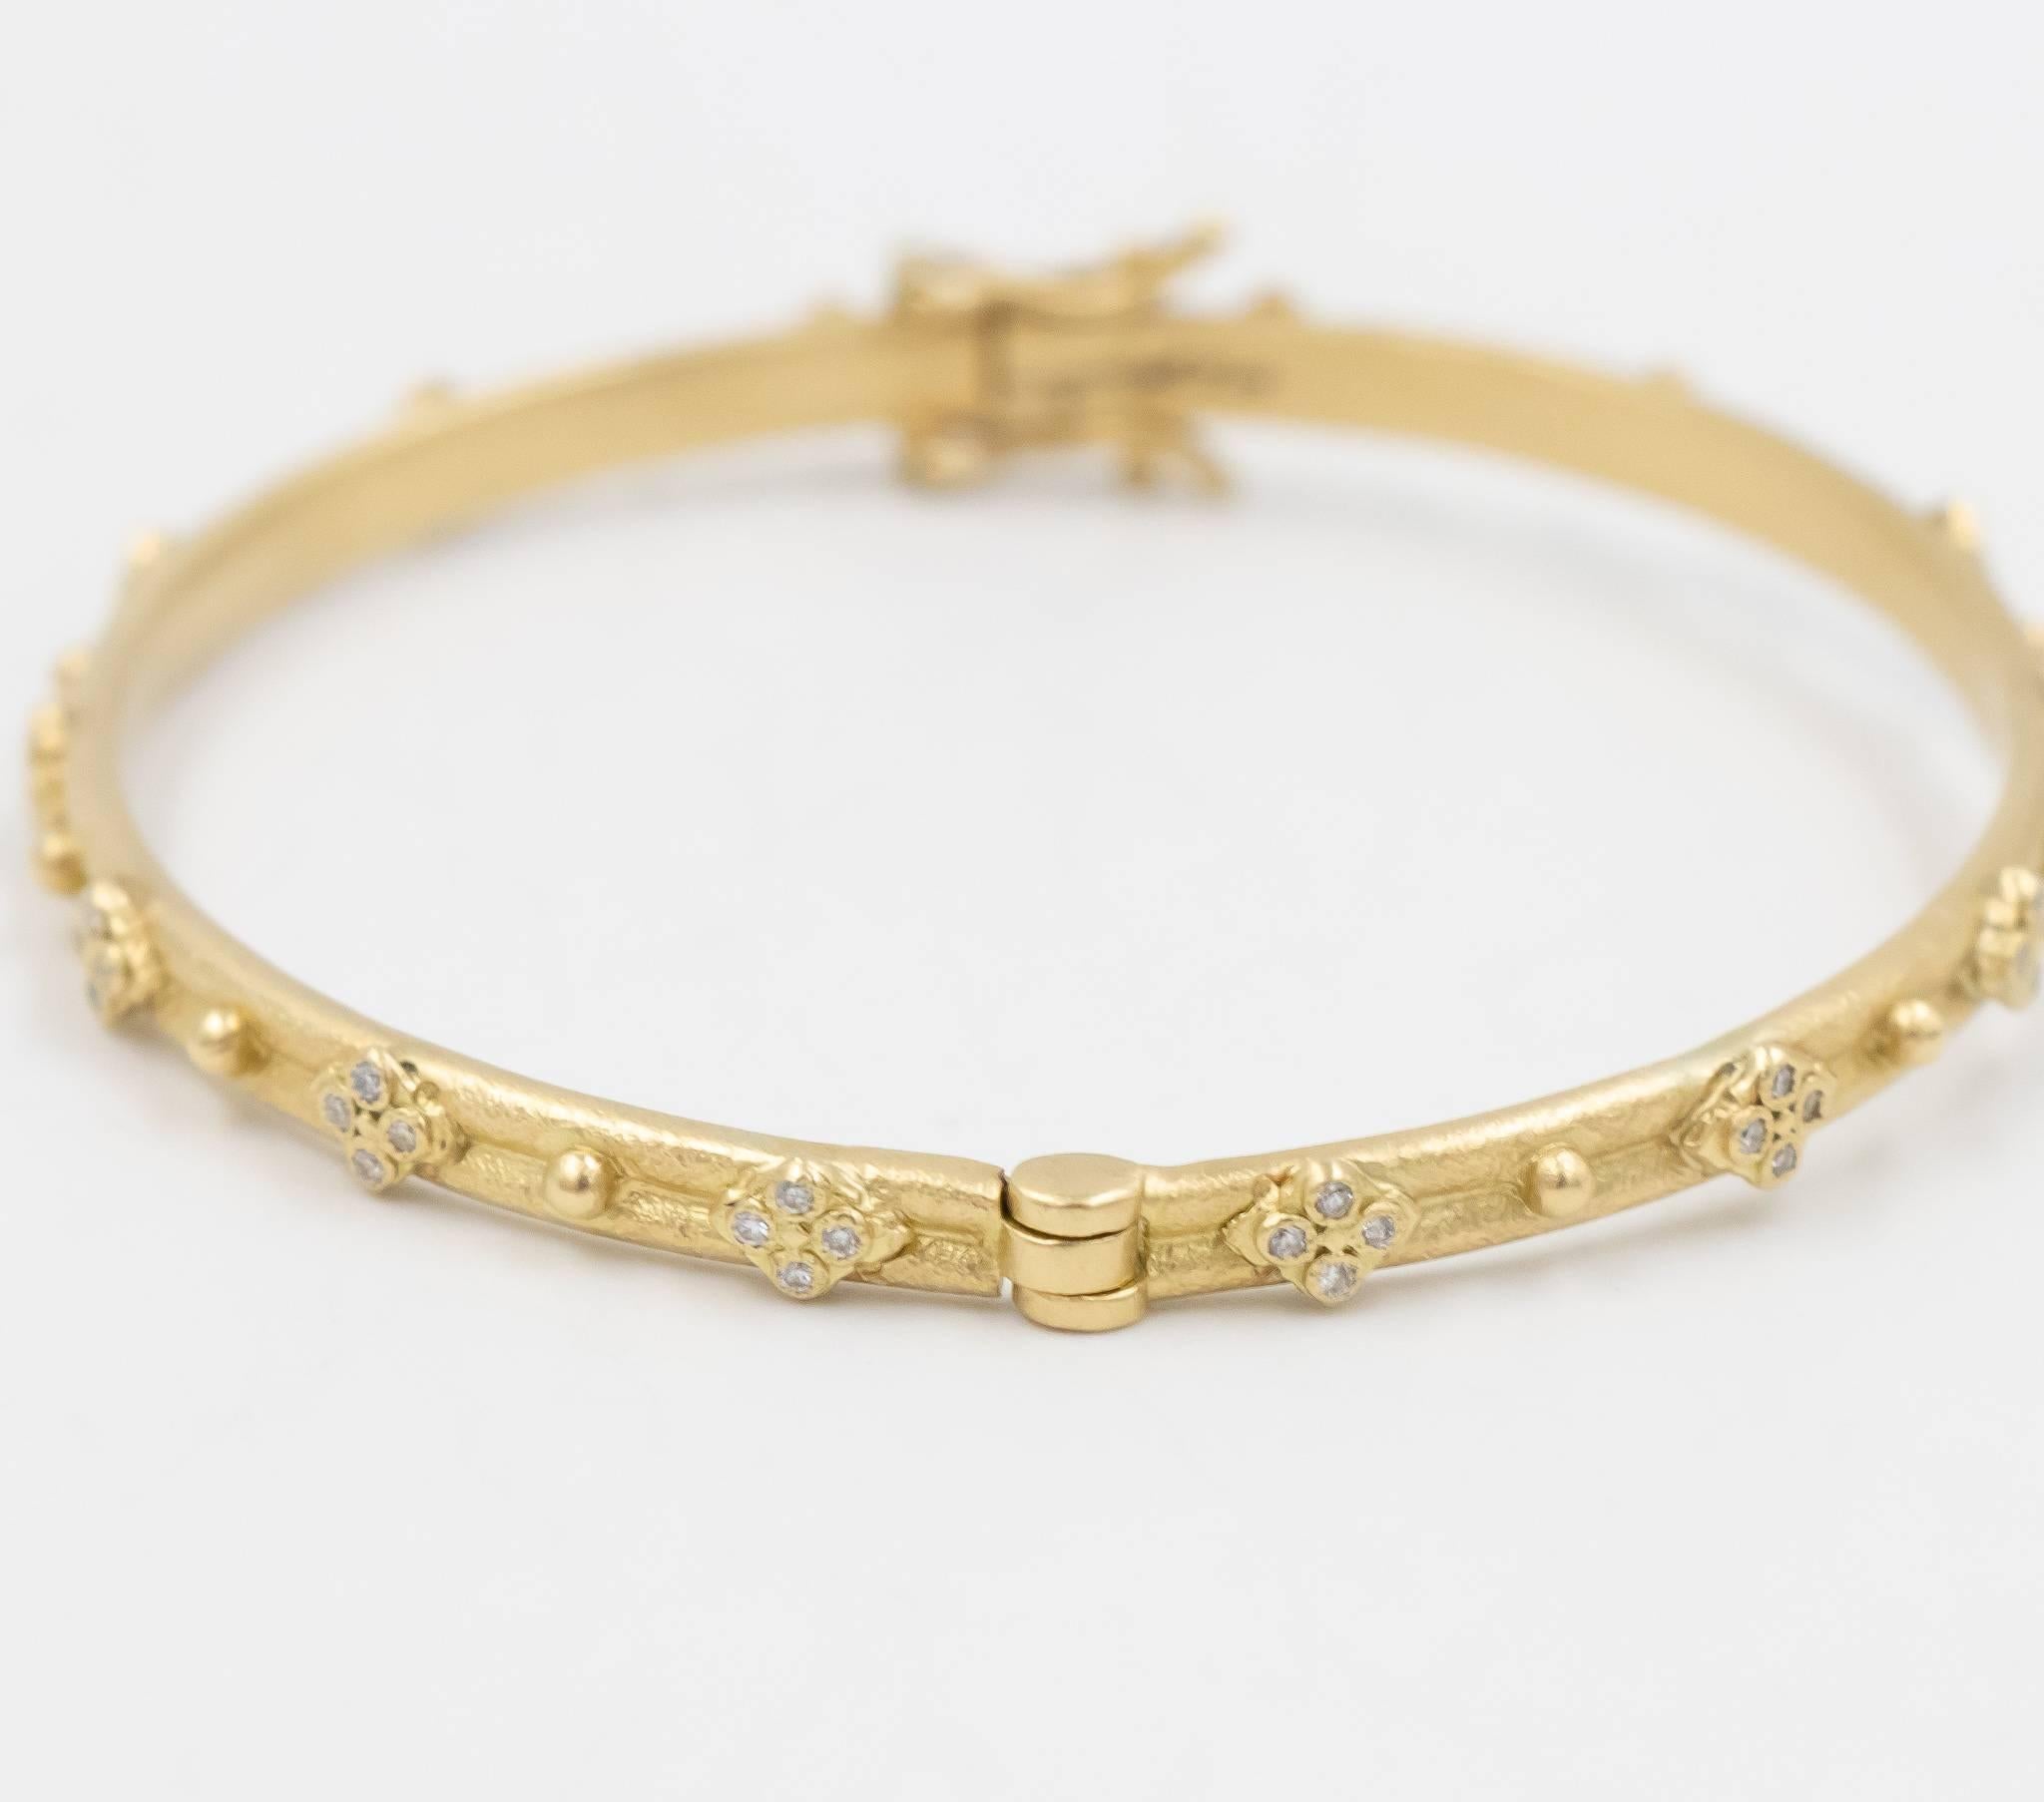 This Armenta huggie bracelet in 18k yellow gold is a Sueno collection piece with white diamonds.  This is a bangle bracelet with a hinge clasp with a security clasp feature.  The diamonds are all set in small stations of four throughout the design. 